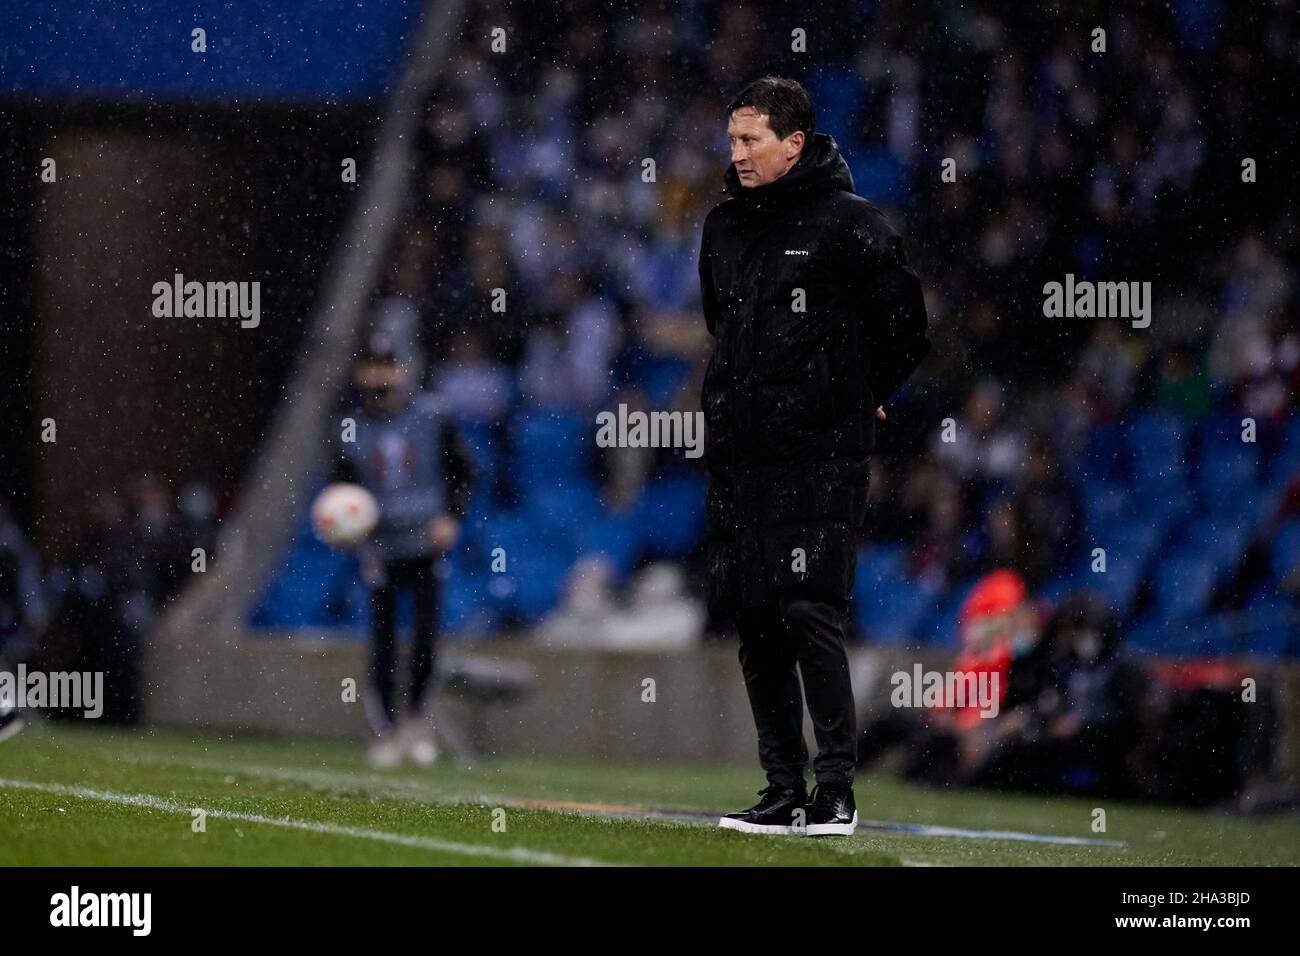 SAN SEBASTIAN, SPAIN - DECEMBER 09: Roger Schmidt Head coach of PSV Eindhoven during the UEFA Europa League group B match between Real Sociedad and PSV Eindhoven at Estadio Anoeta on December 9, 2021 in San Sebastian, Spain. (Photo by MB Media) Stock Photo